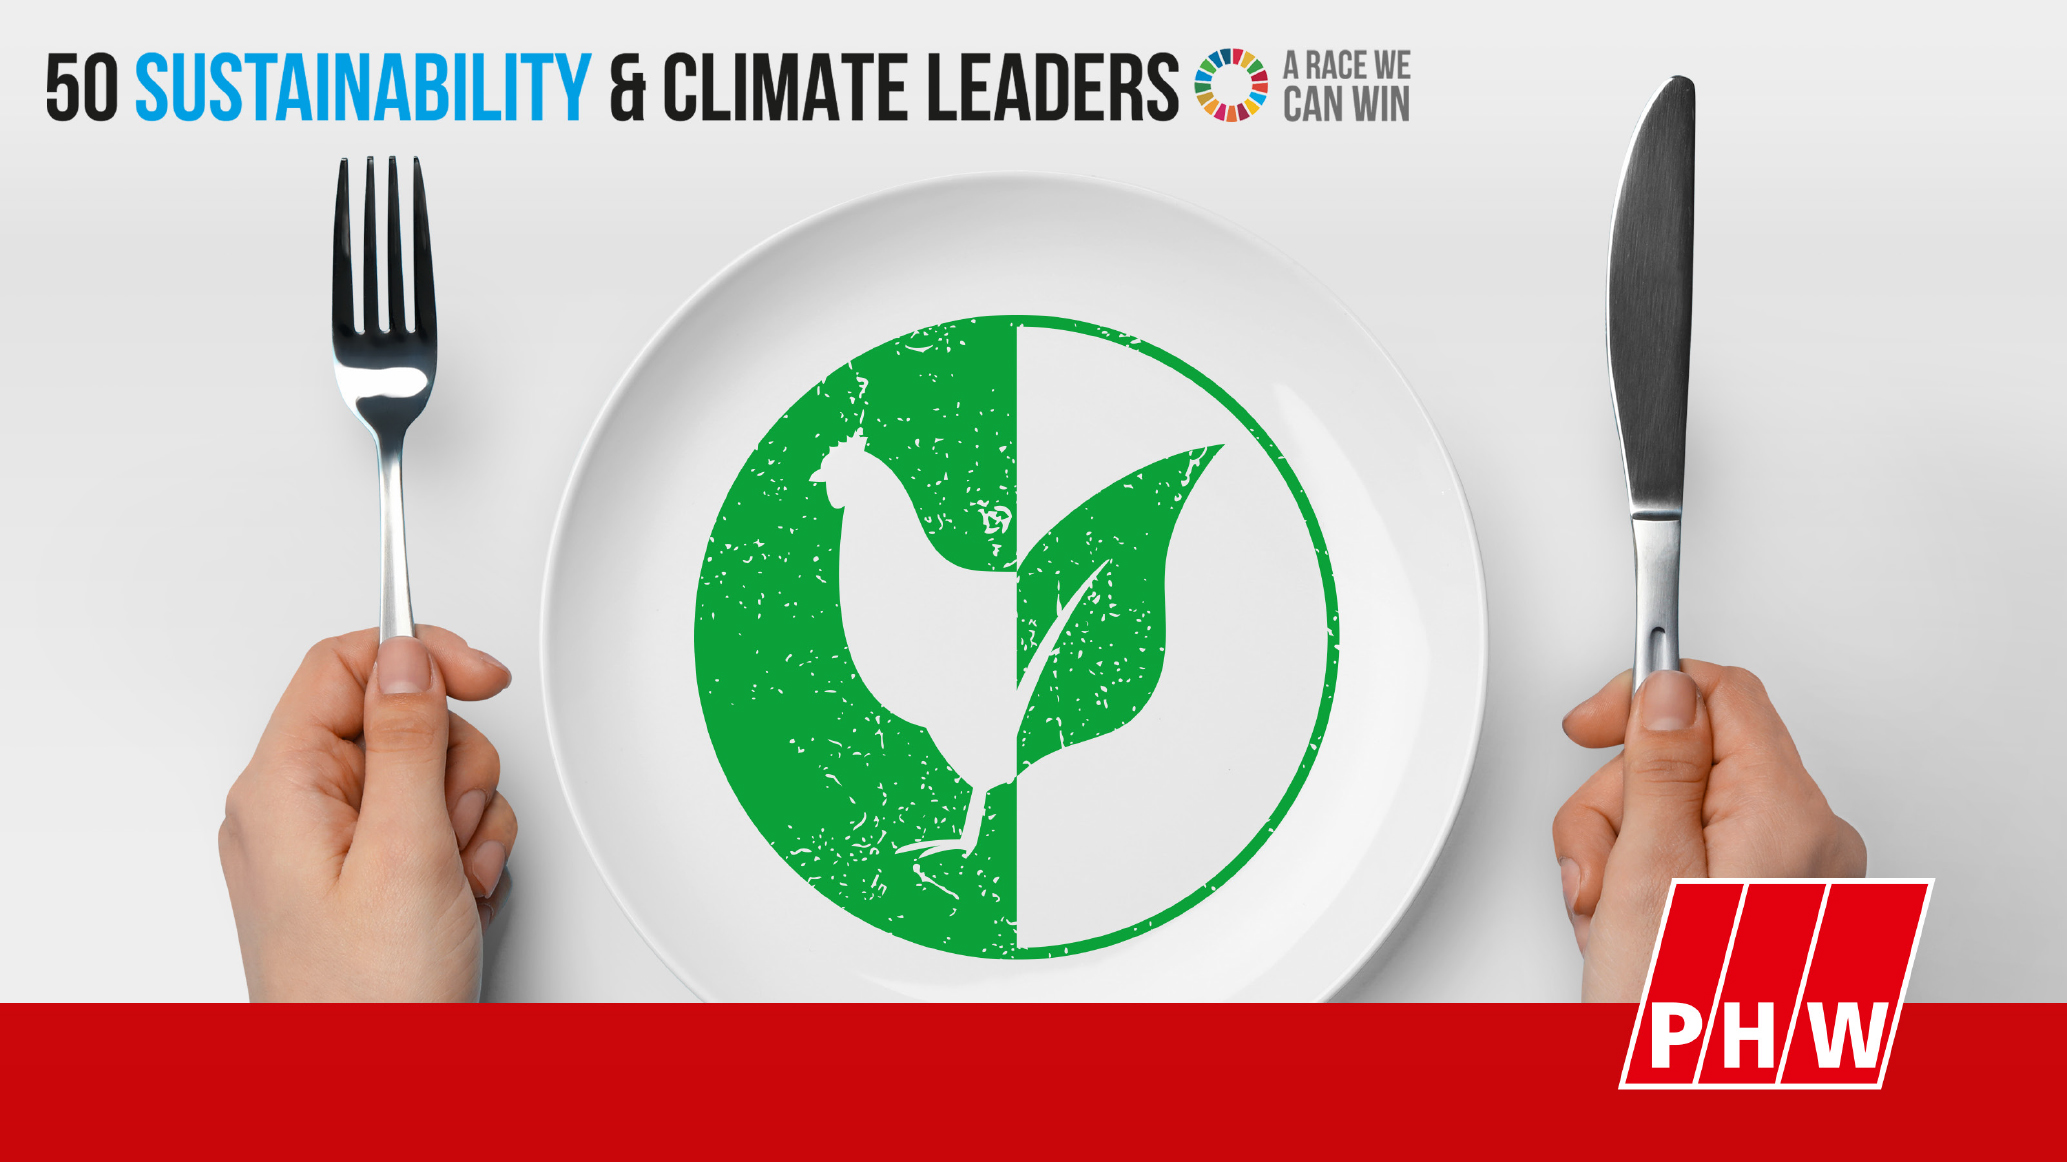 International recognition for commitment to sustainability: PHW Group amongst “50 Sustainability & Climate Leaders” globally